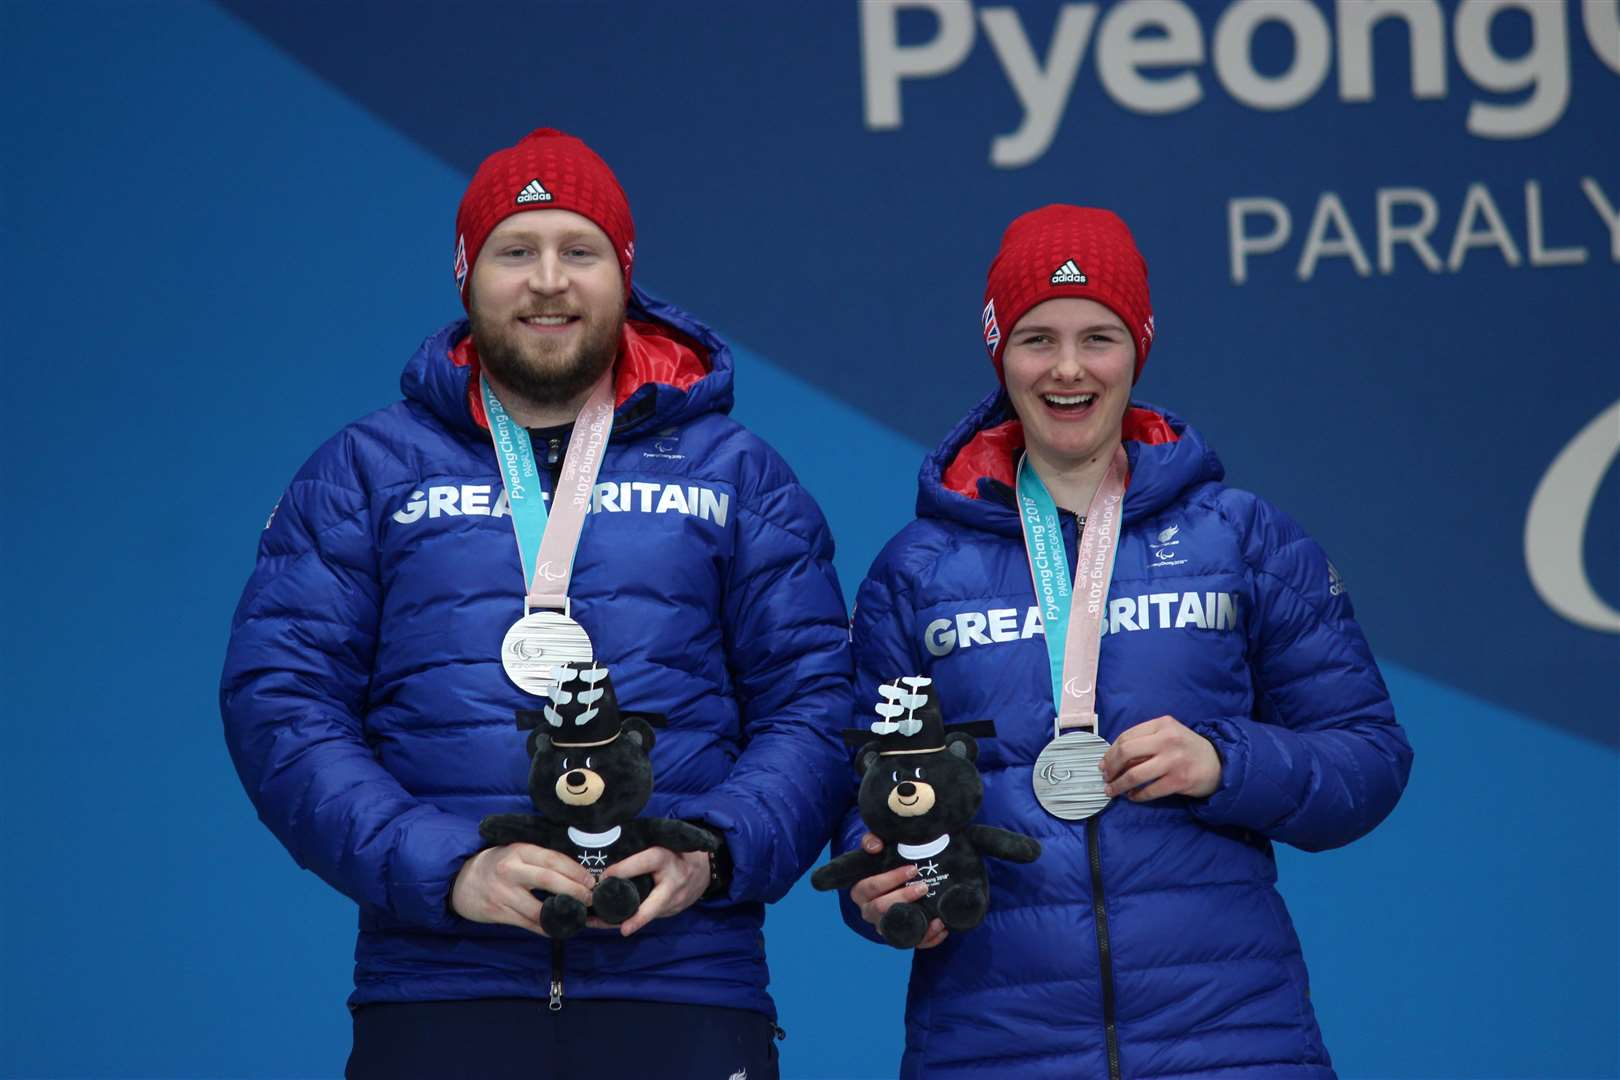 Millie Knight and her guide Brett Wild celebrate winning silver at the Winter Paralympics in Pyeongchang (6469975)